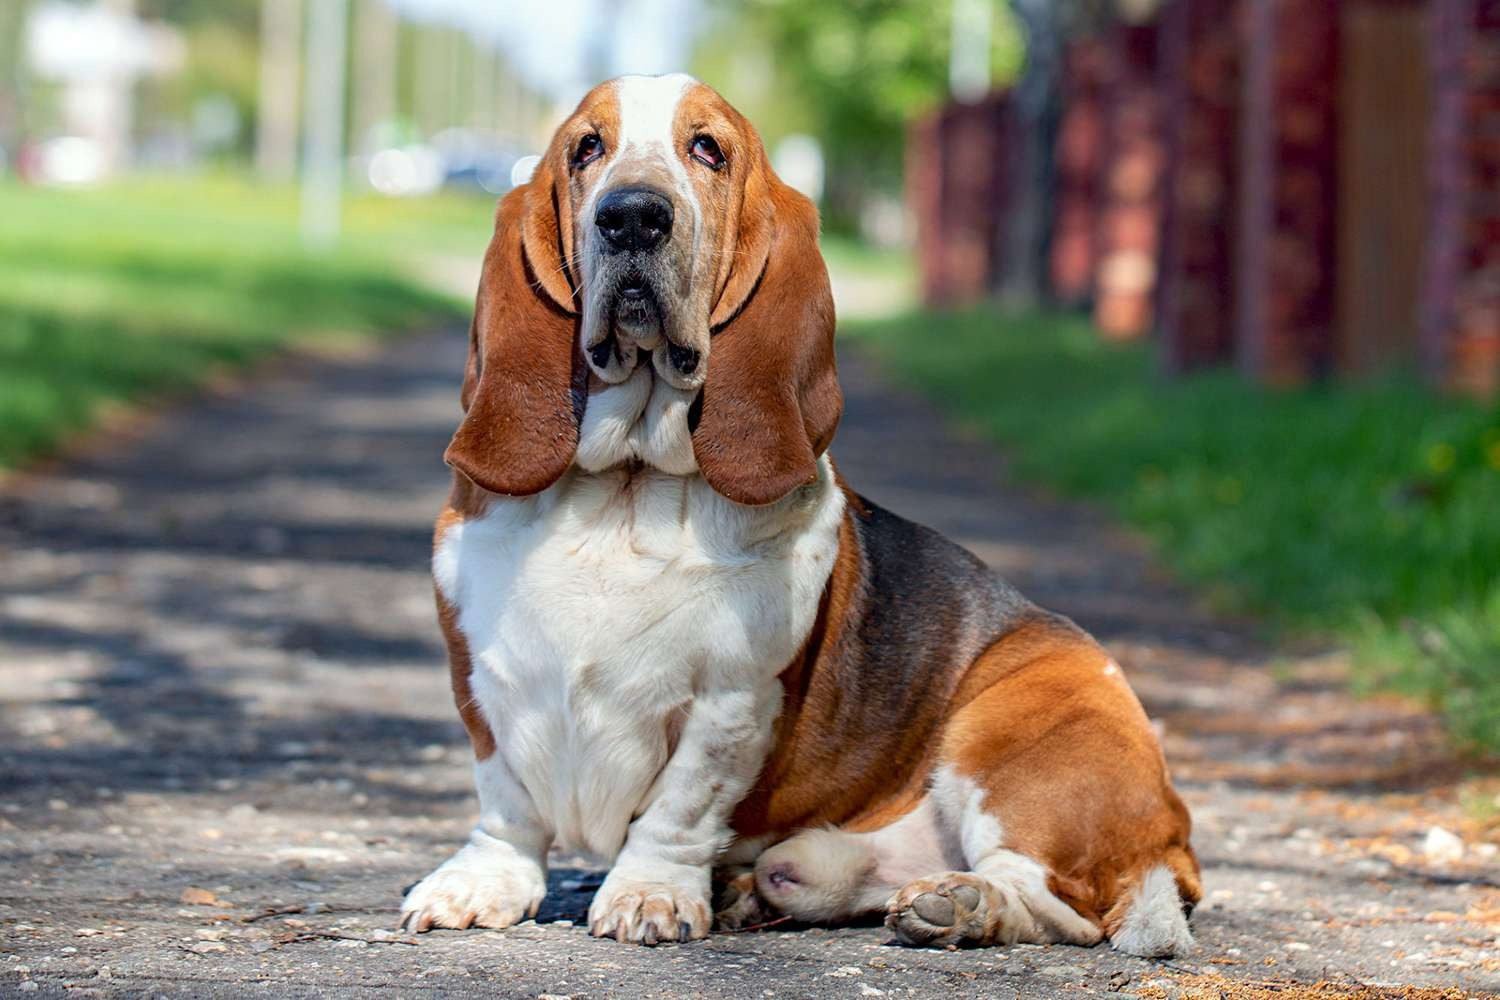 Dog Breeds Compatible with Cats: Basset Hounds